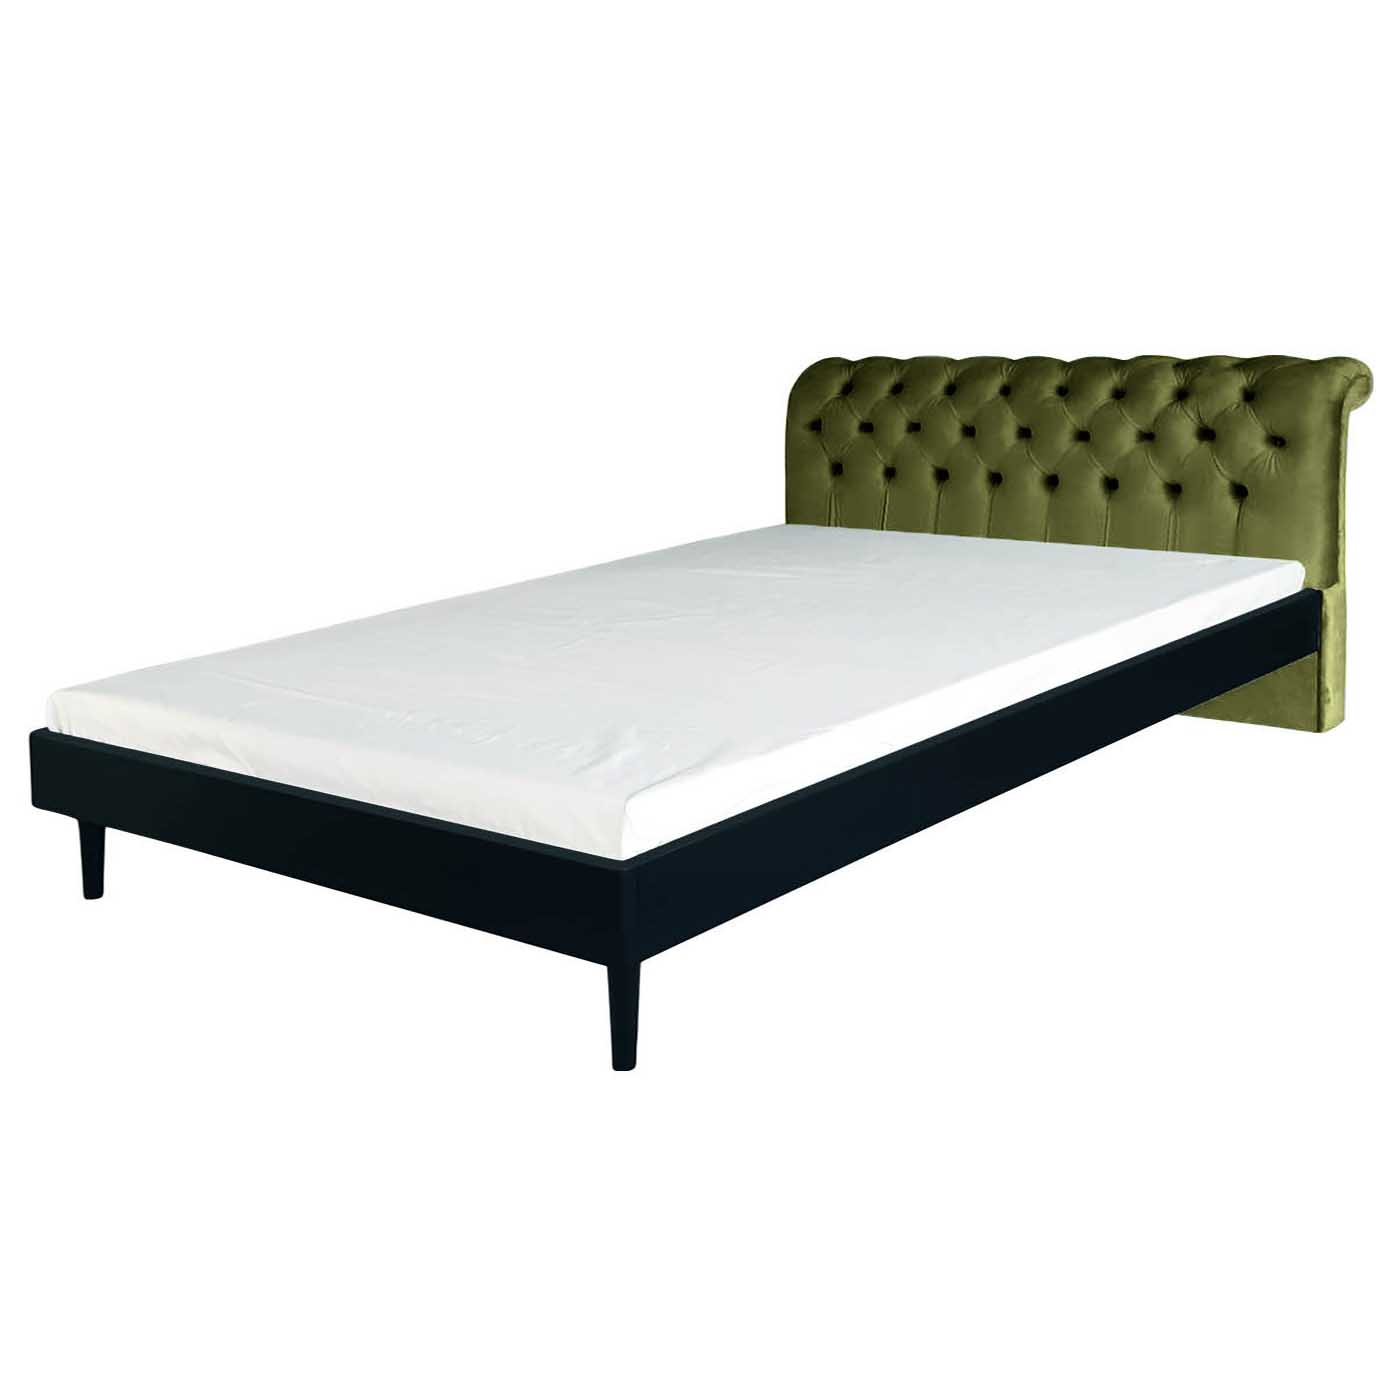 Chesterfield Olive Stitch Black King Bed